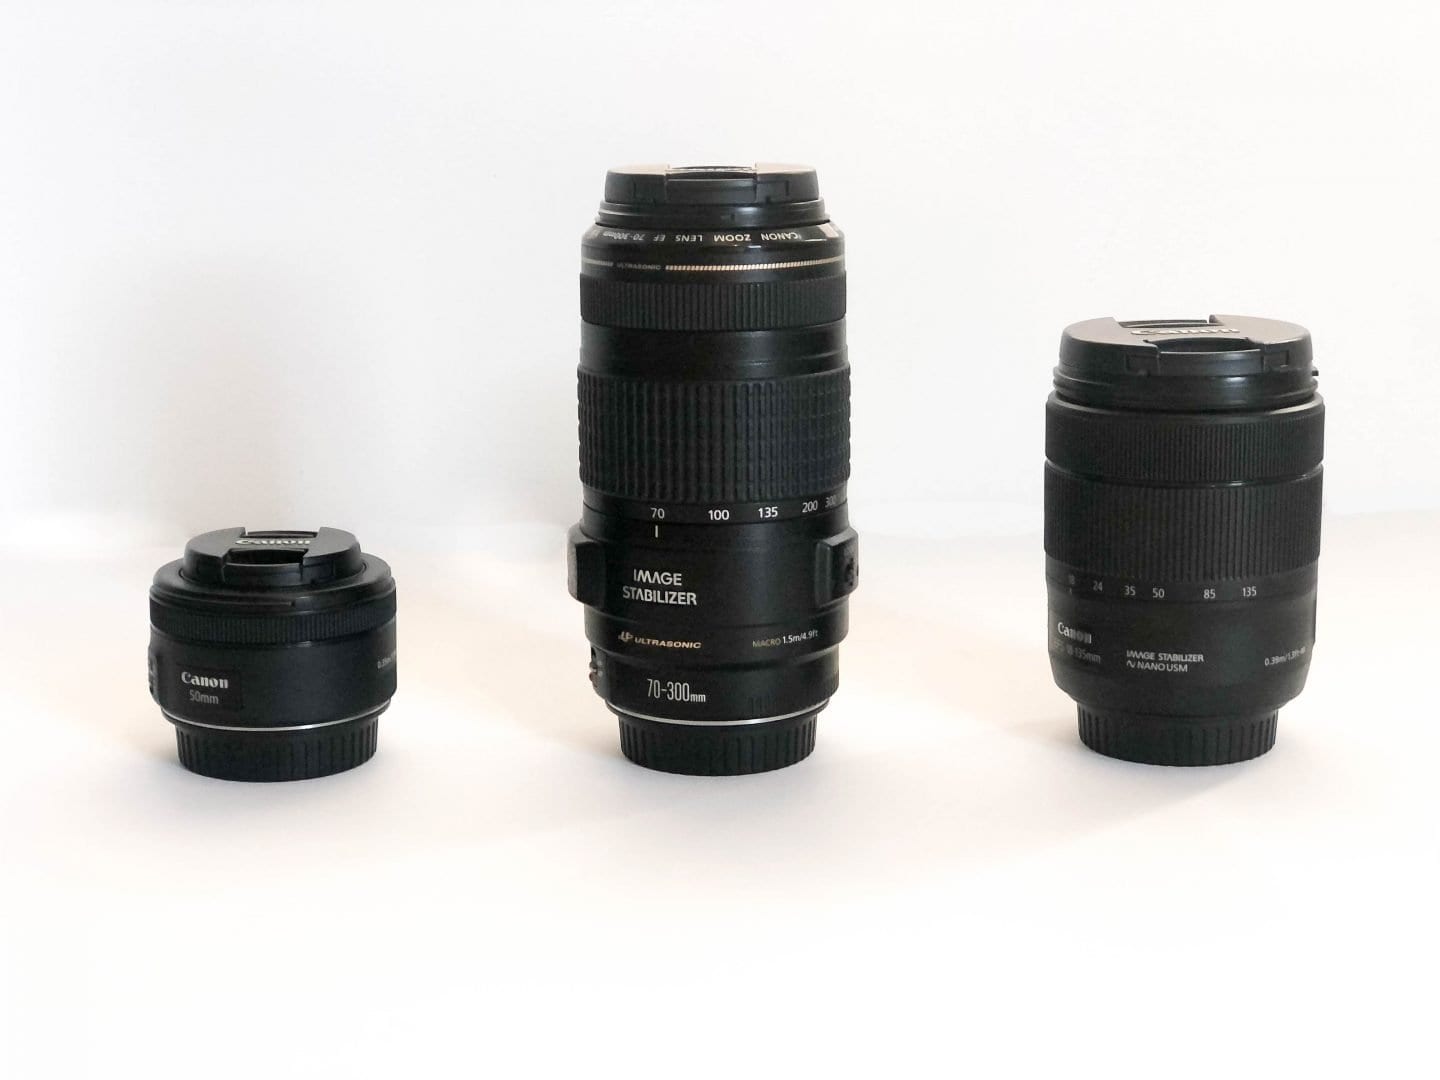 How to Choose Your First Camera Lens